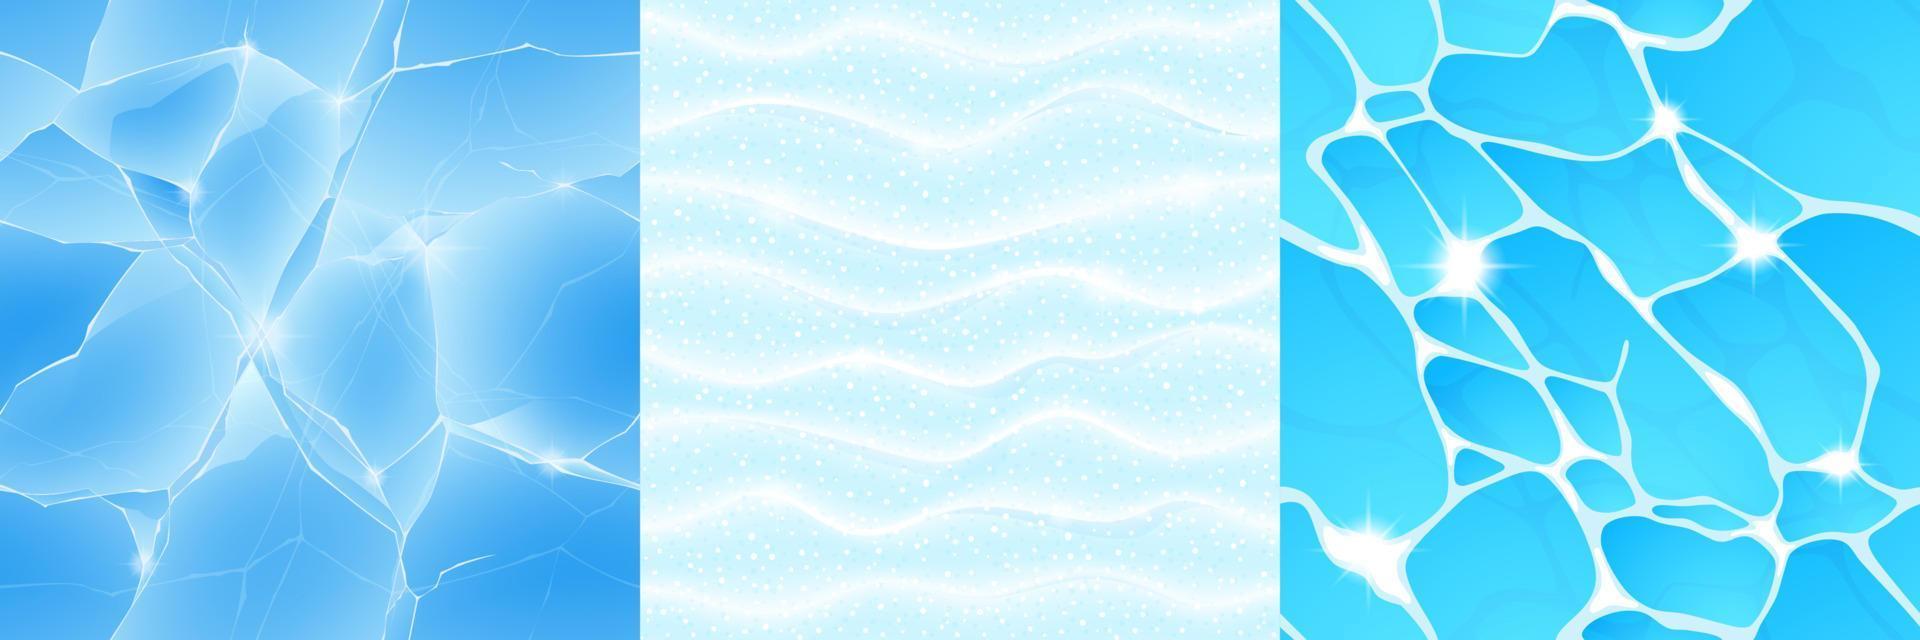 Game textures of ice, snow, water seamless pattern vector